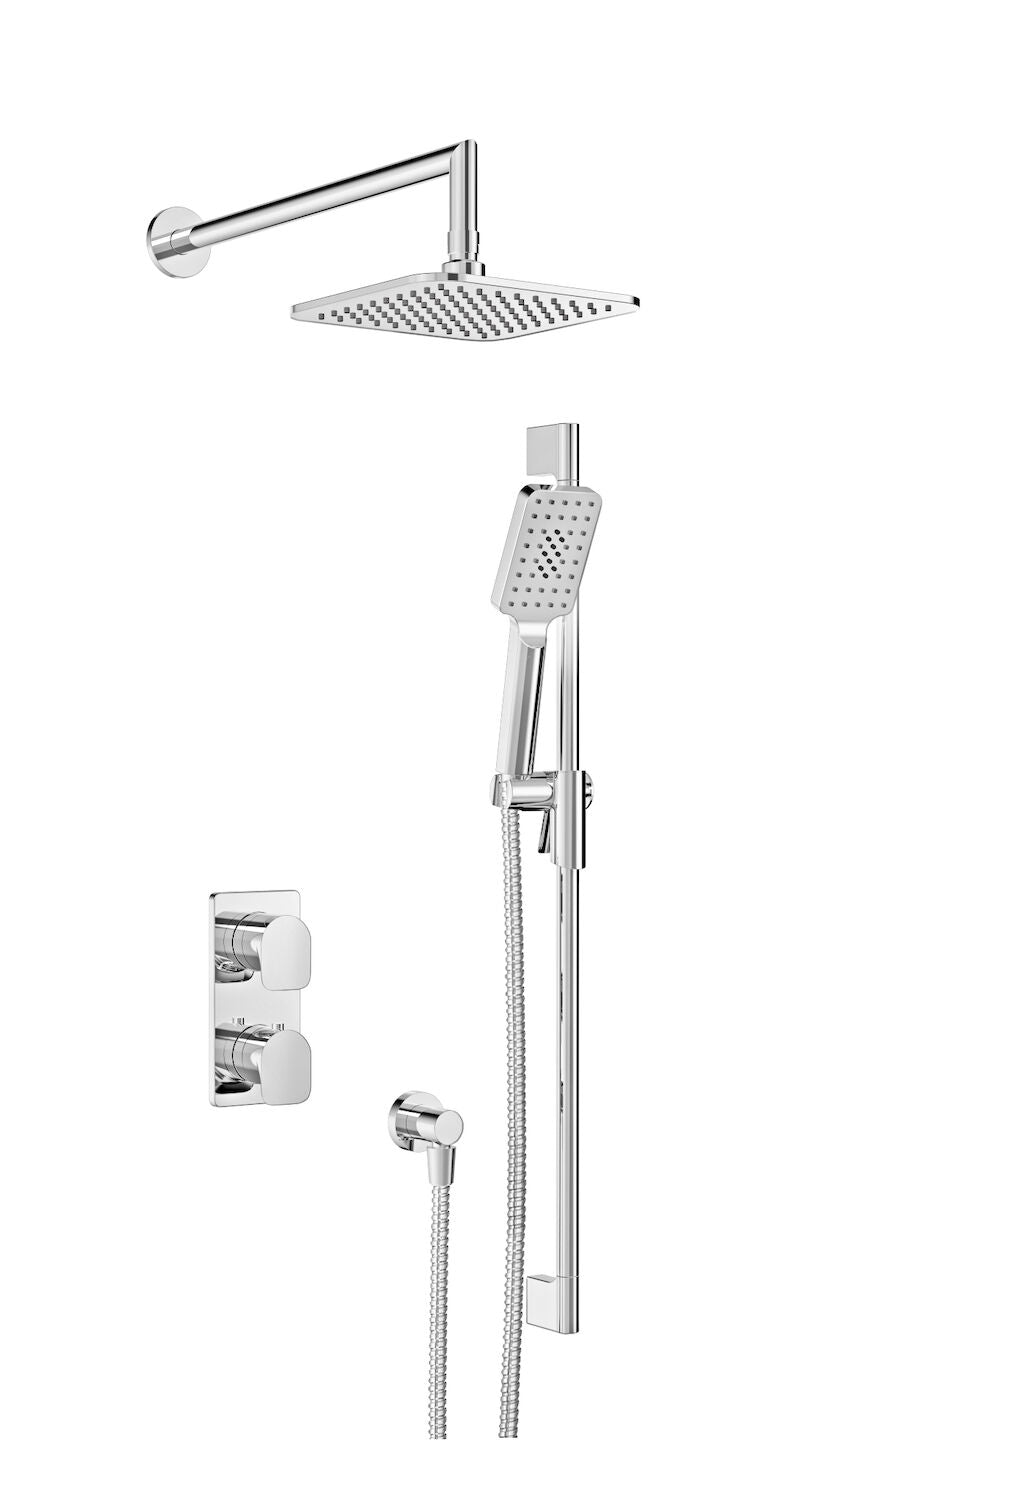 PETITE B04 COMPLETE 2-FUNCTION THERMOSTATIC PRESSURE BALANCED SHOWER TIRM KIT ONLY